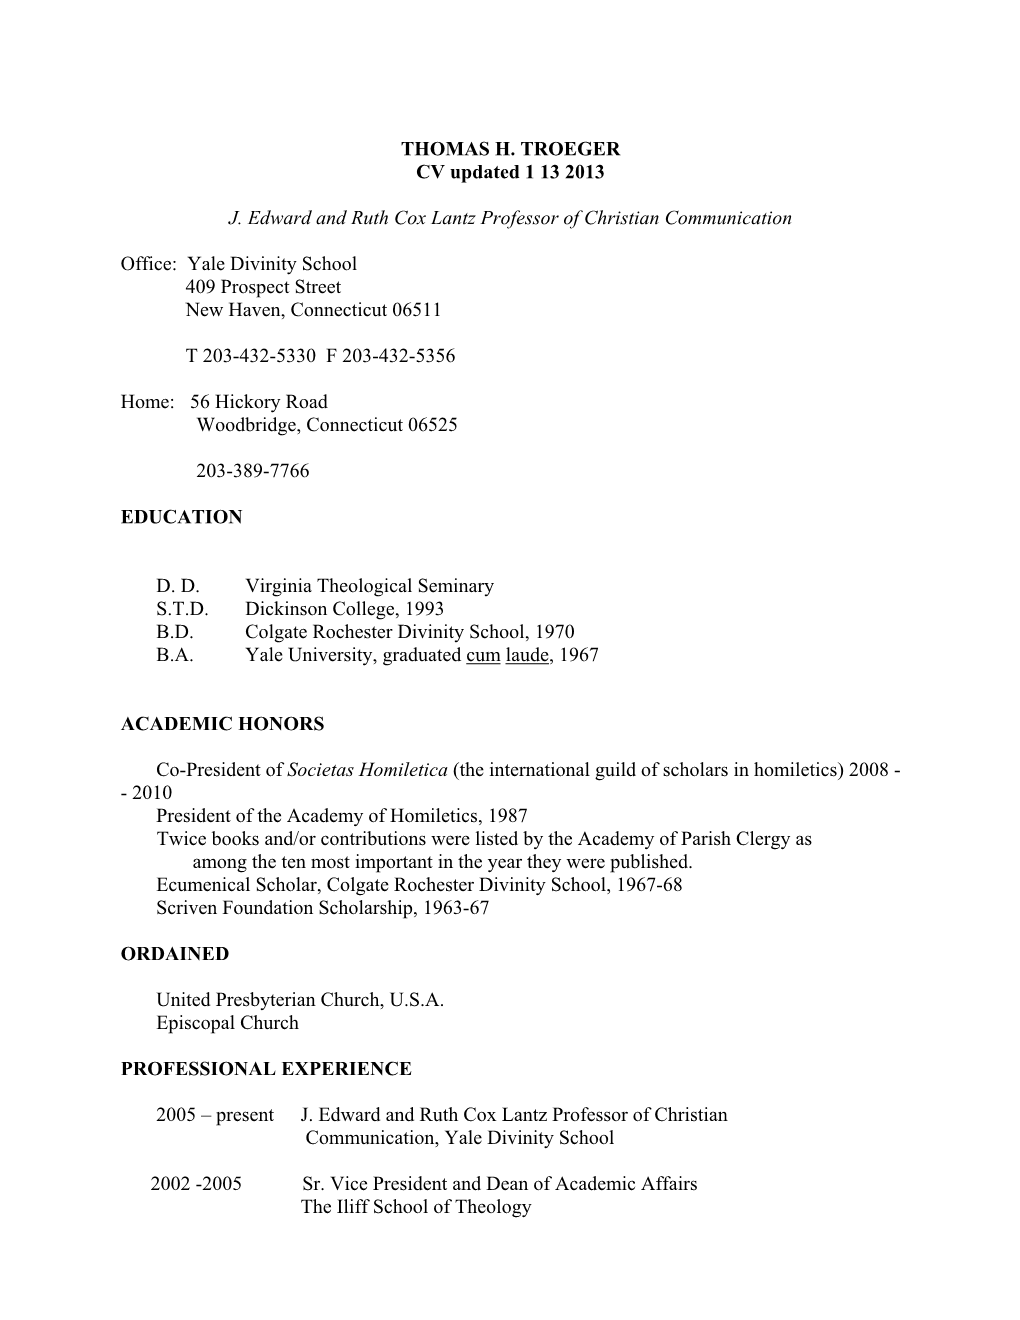 THOMAS H. TROEGER CV Updated 1 13 2013 J. Edward and Ruth Cox